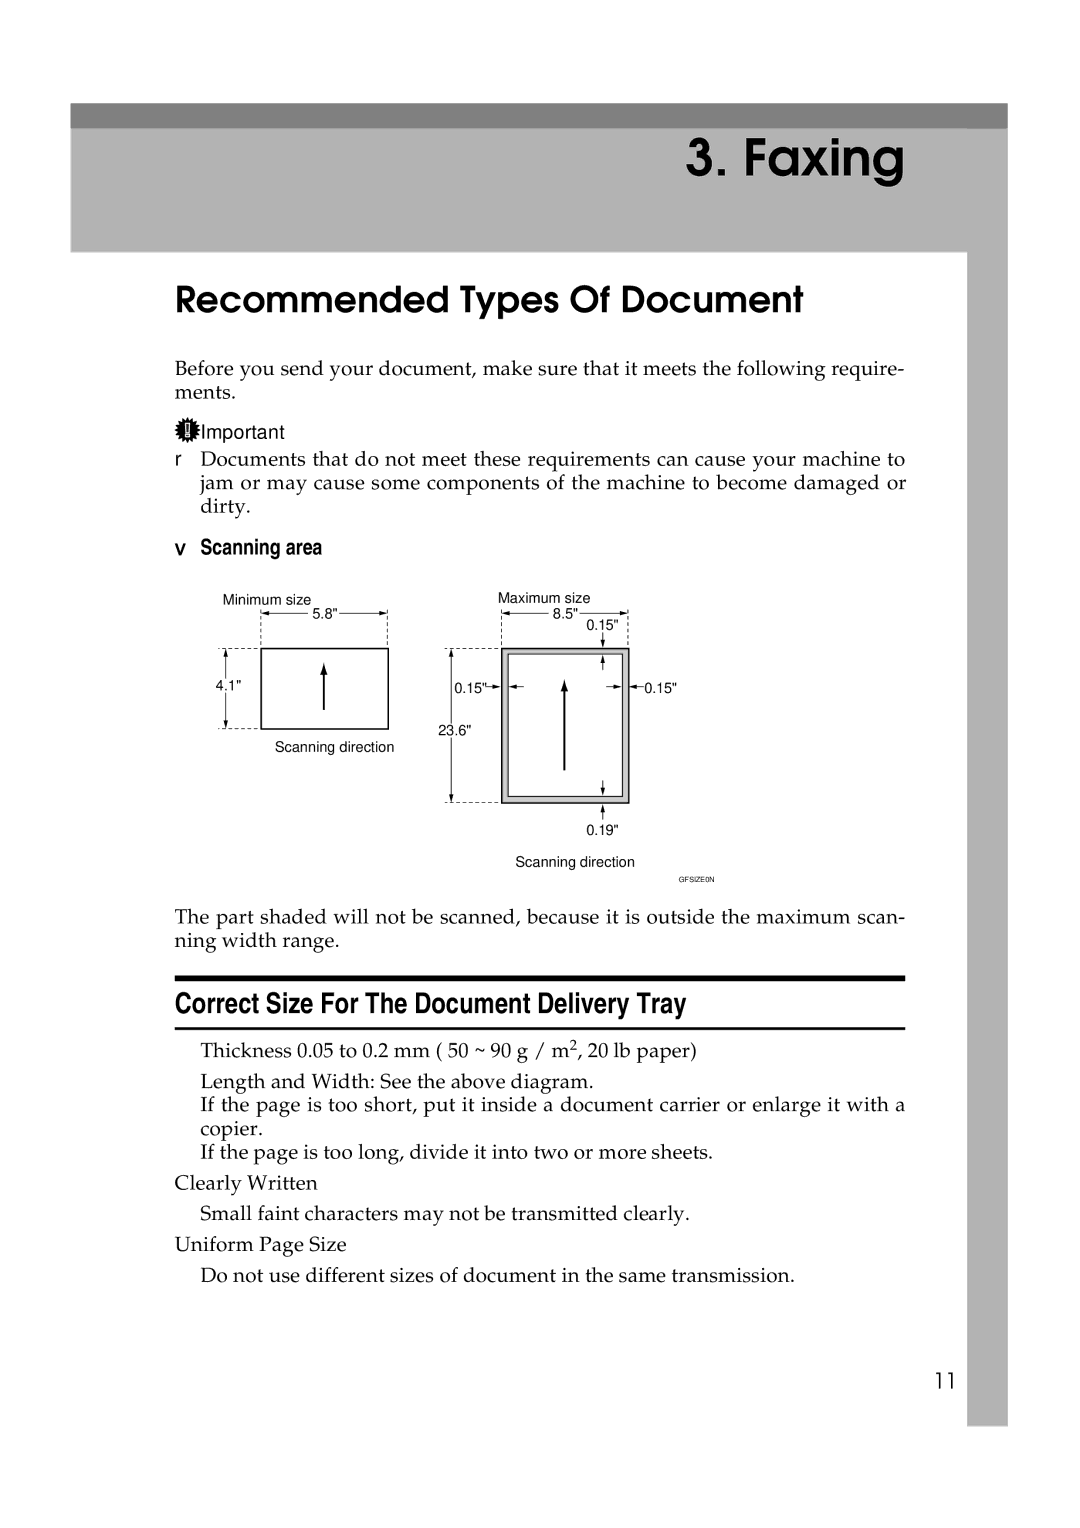 Ricoh H545 manual Recommended Types Of Document, Correct Size For The Document Delivery Tray, Scanning area 